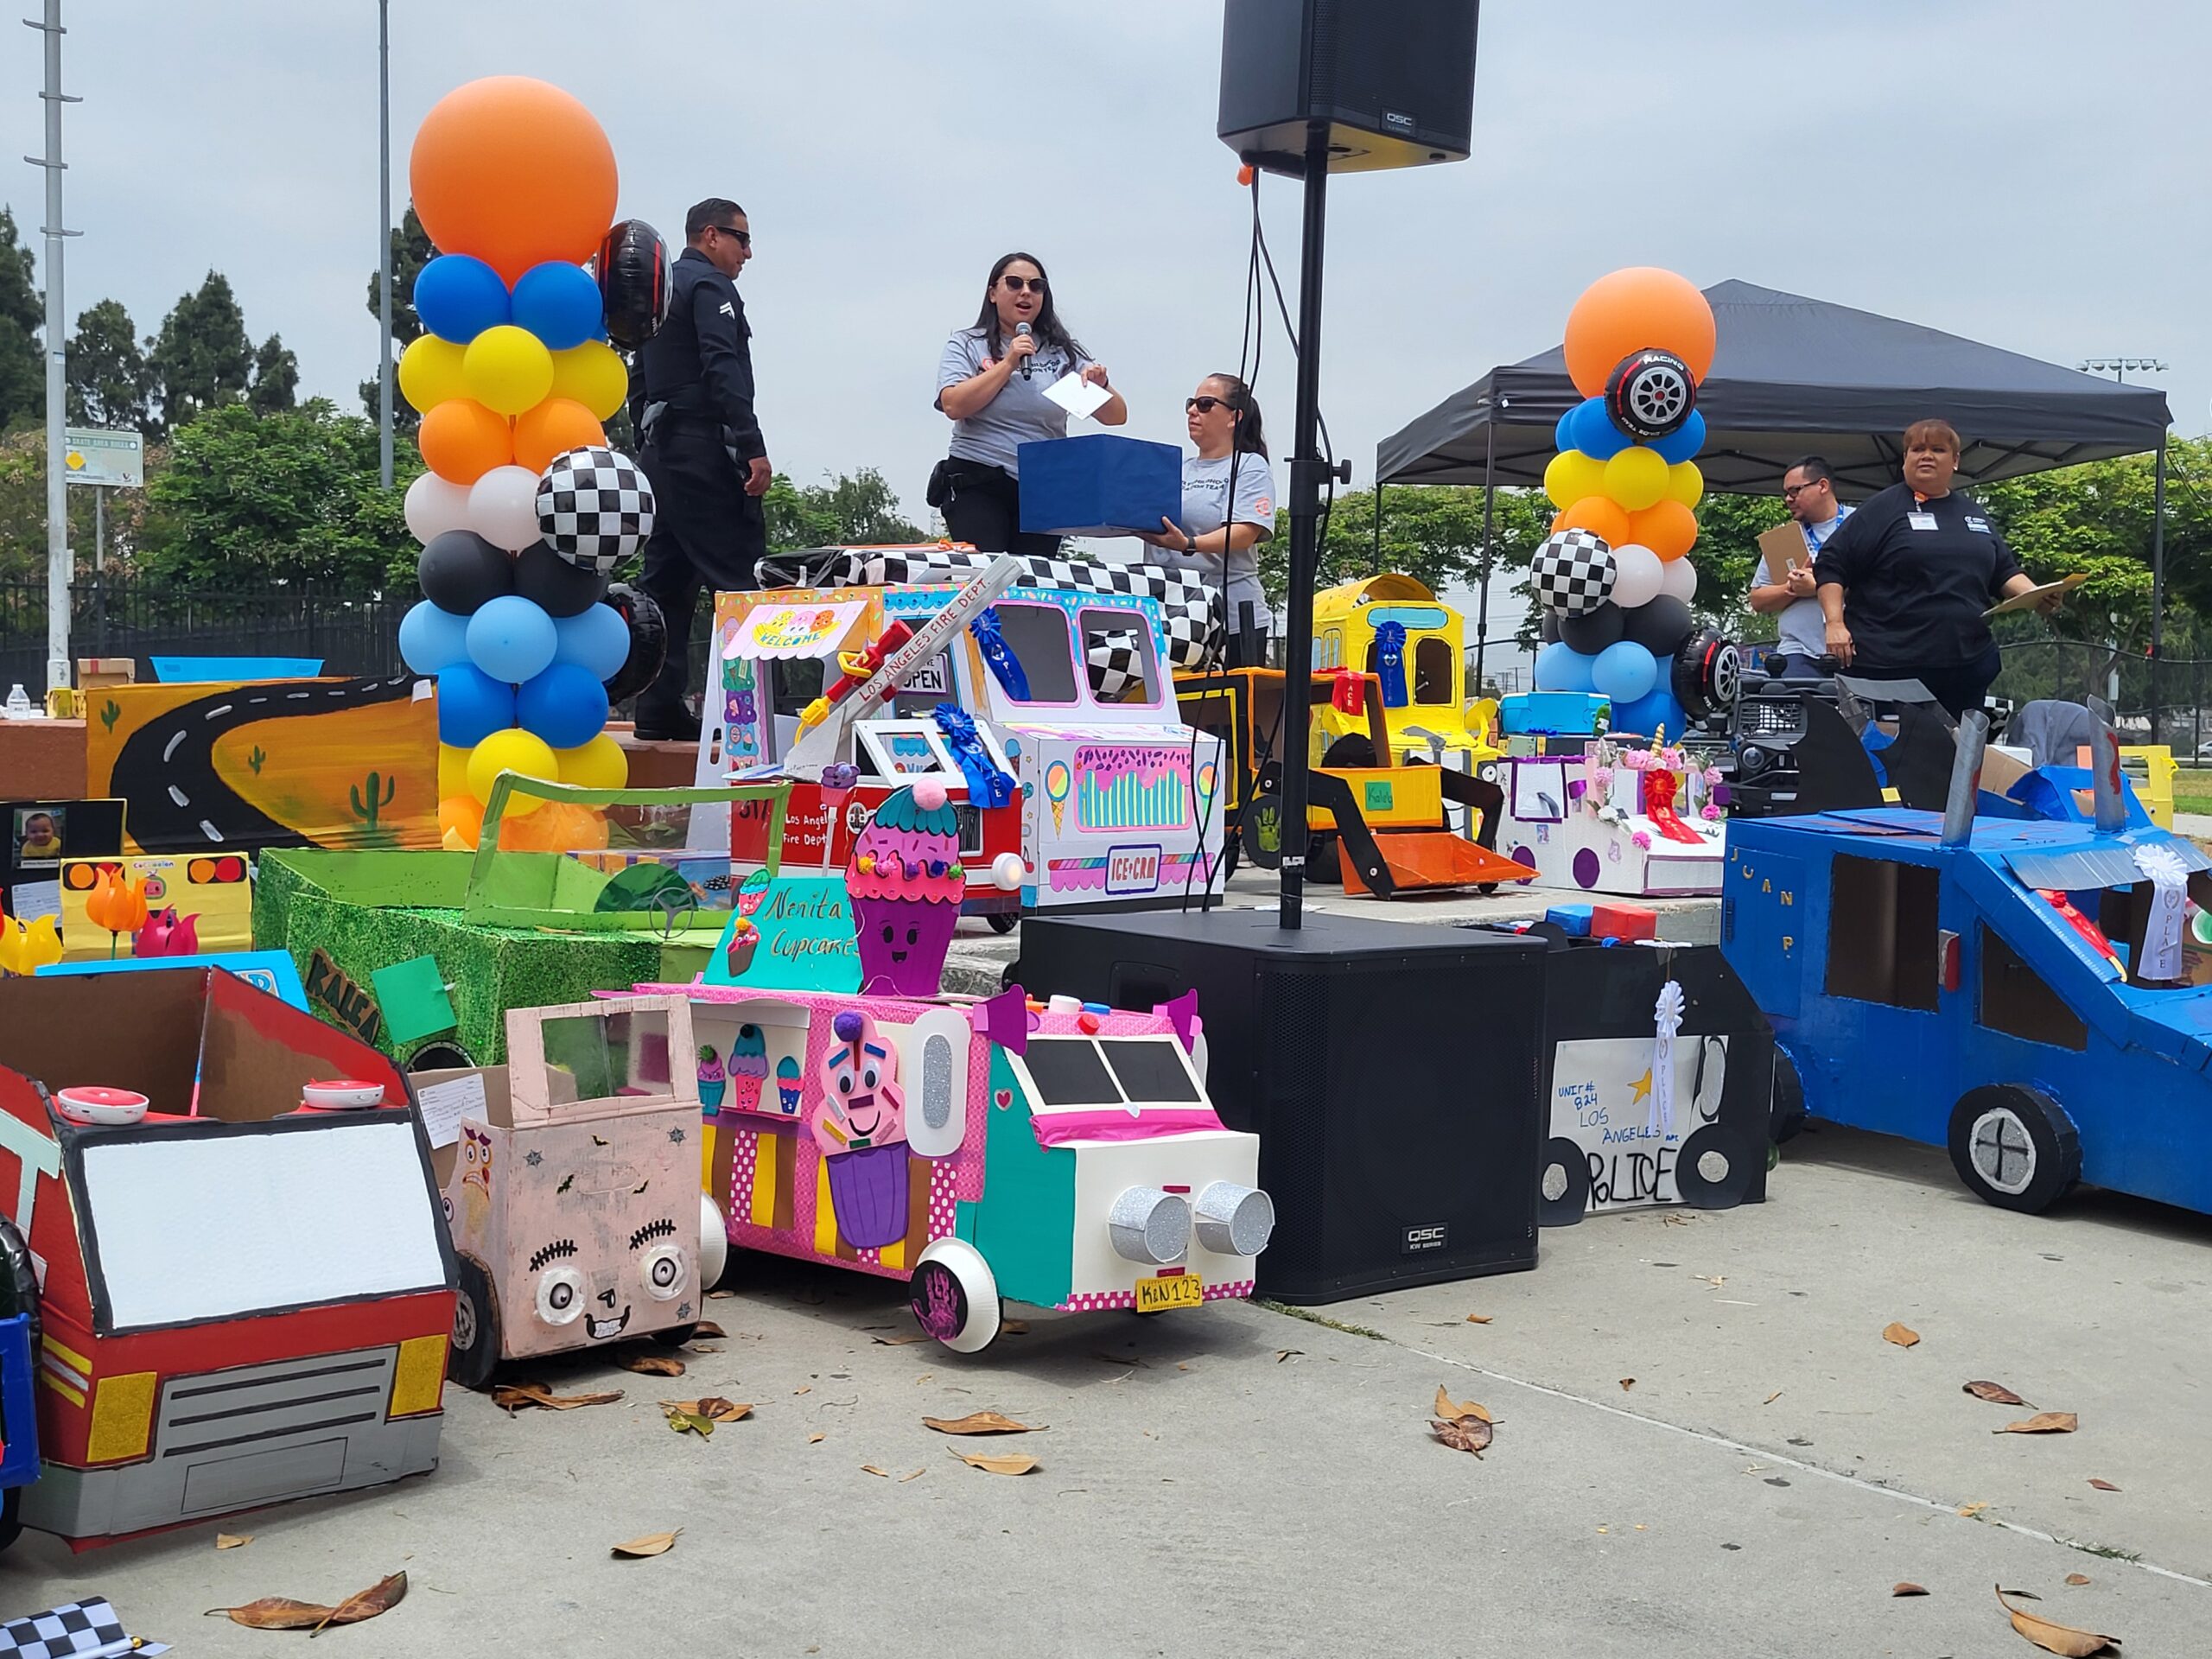 The joy of learning: Kids and EVs at Plug In America’s Ride and Drive event